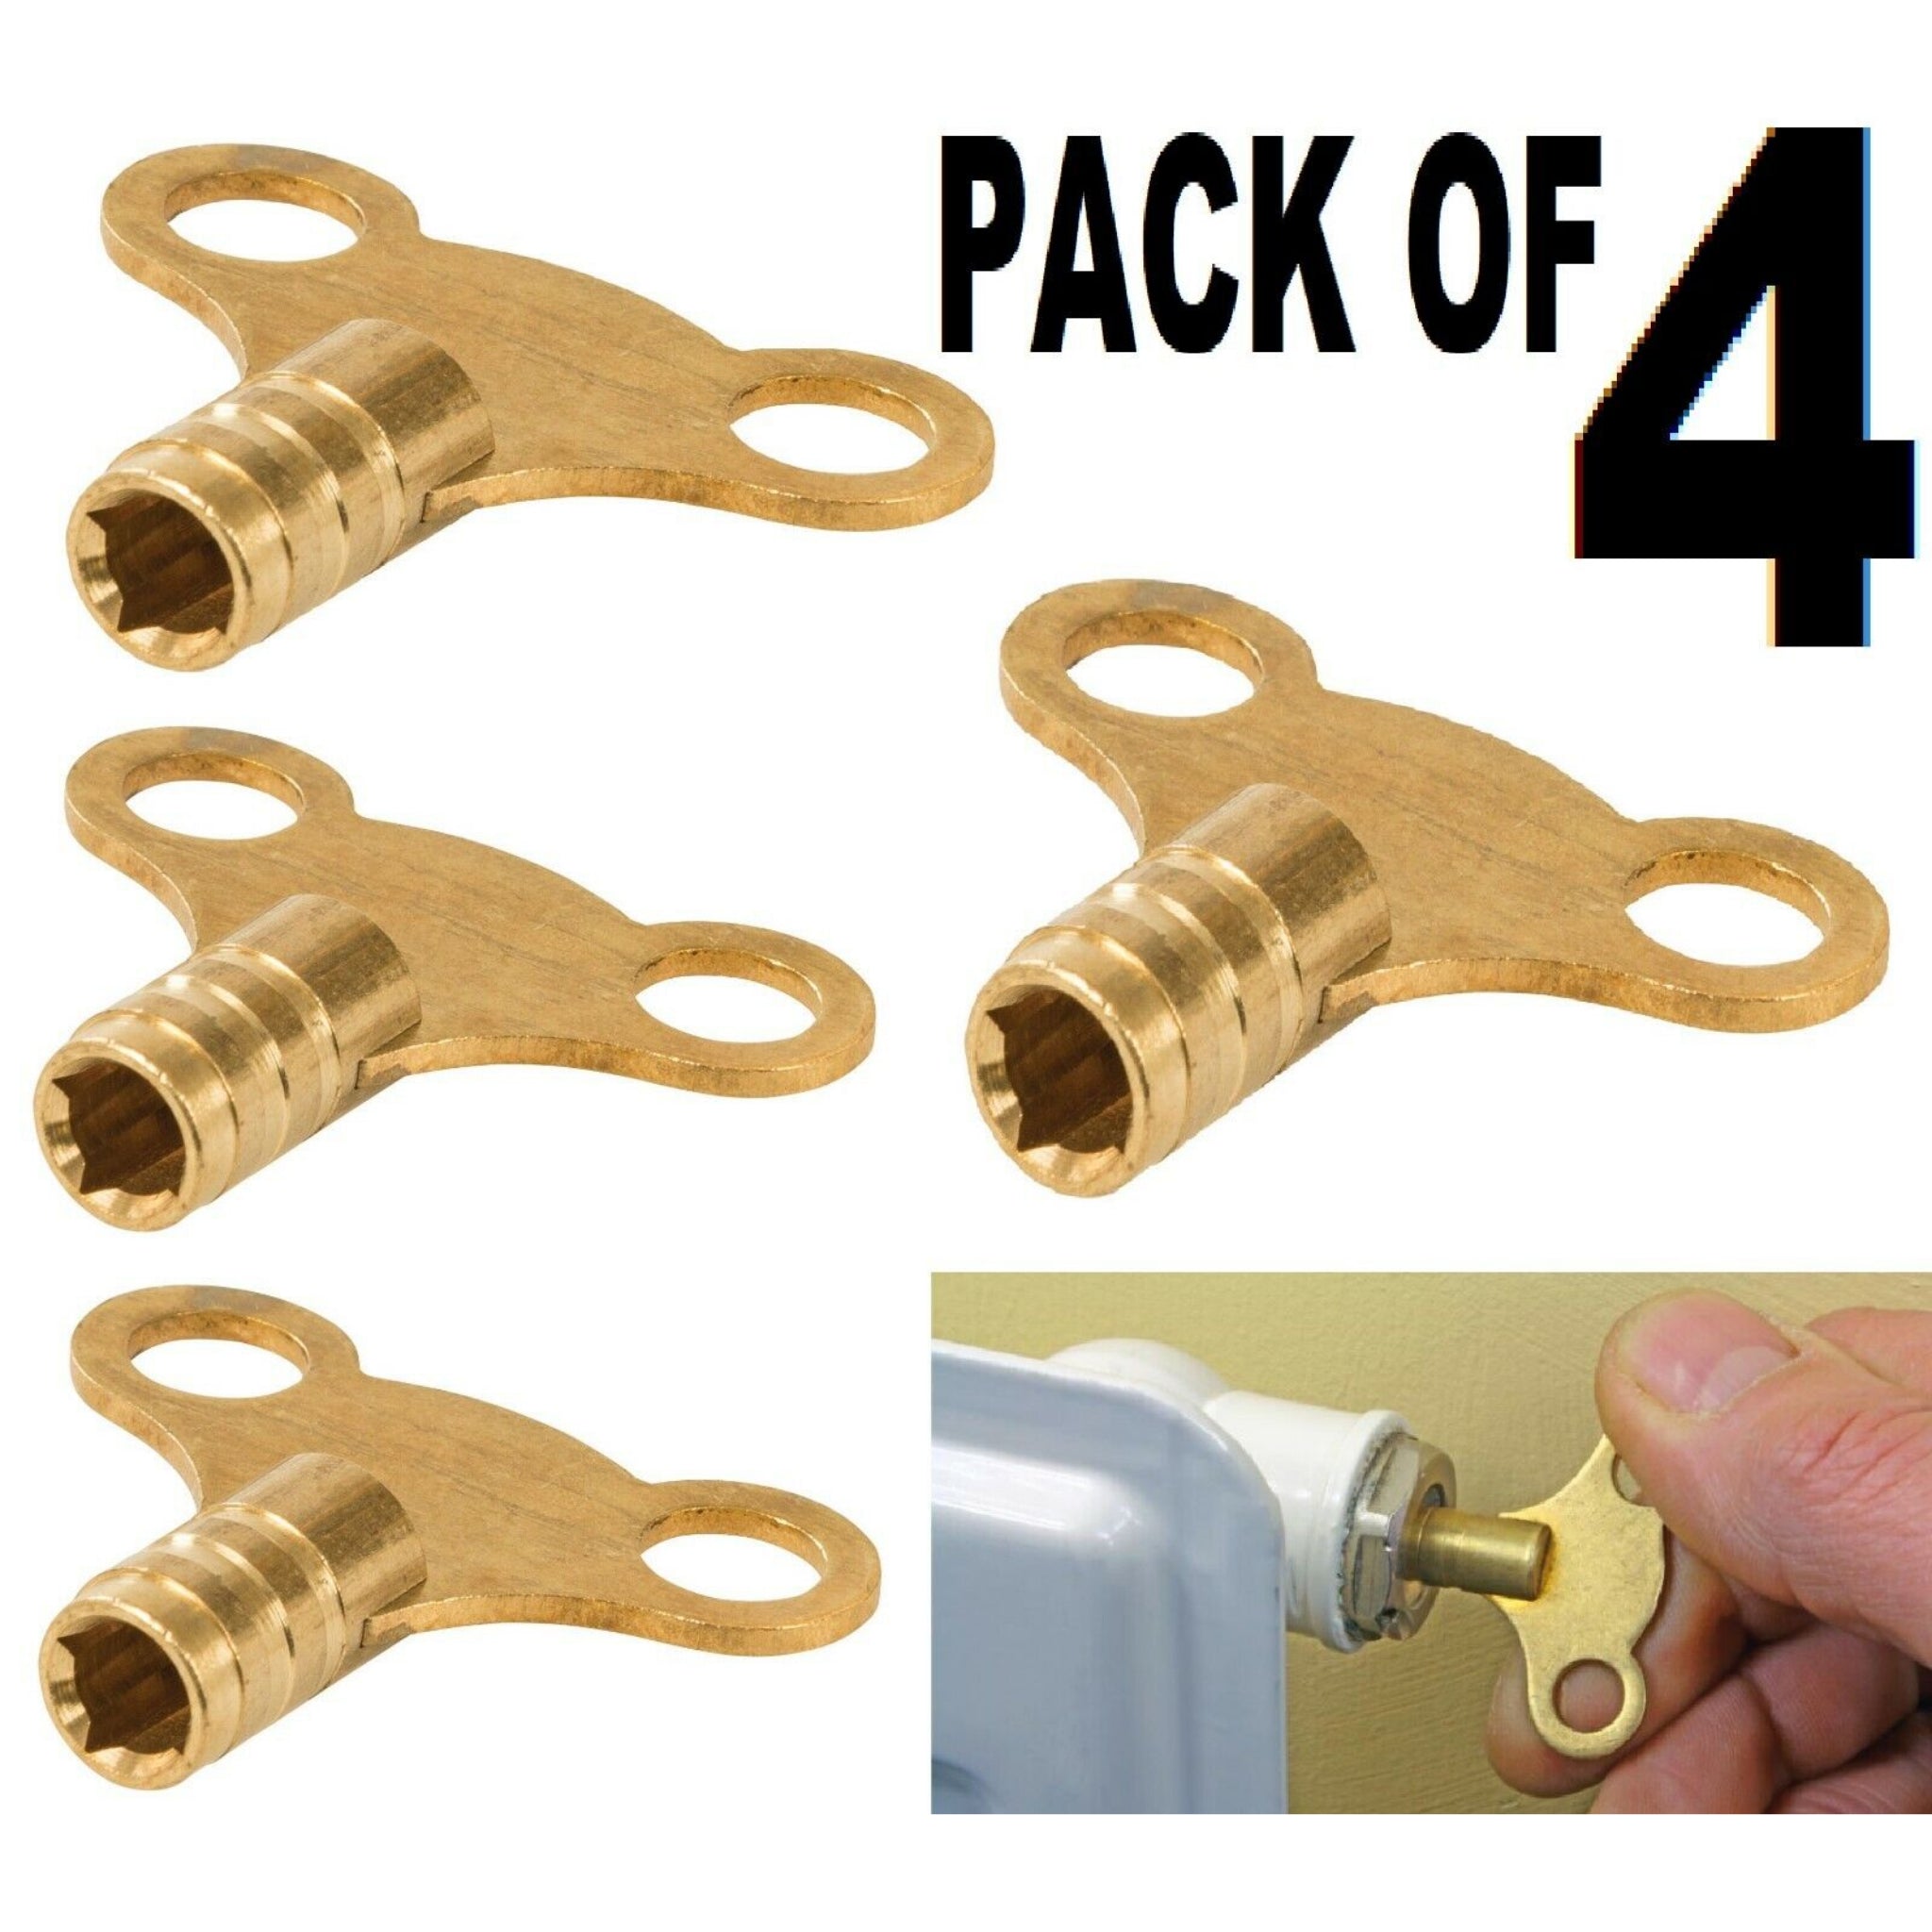 Beclen Harp 4x Solid Brass Radiator Bleed Keys-Perfect Plumbing Tool For Venting Air Valves